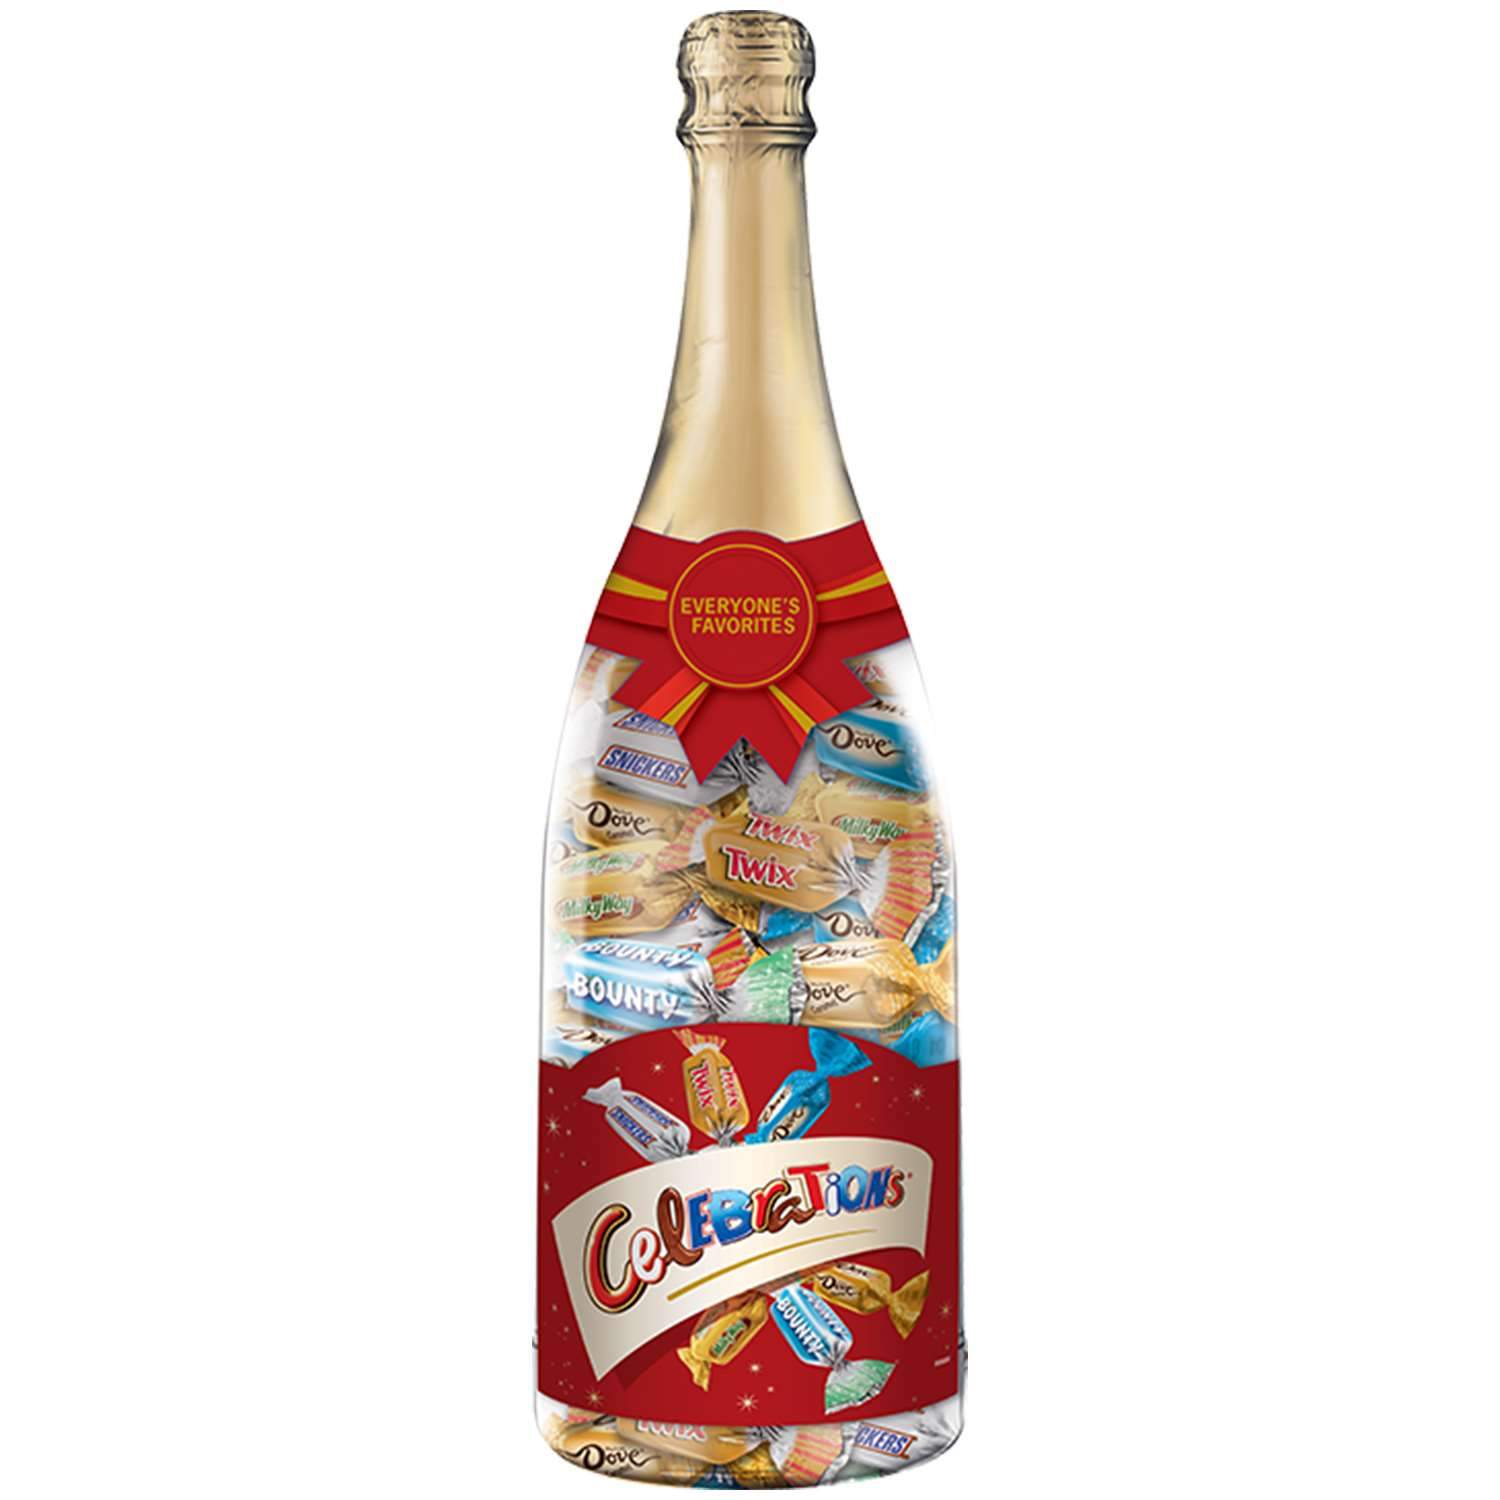 Celebrations Chocolate Candies Meltable Celebrations 9.52 Ounce 